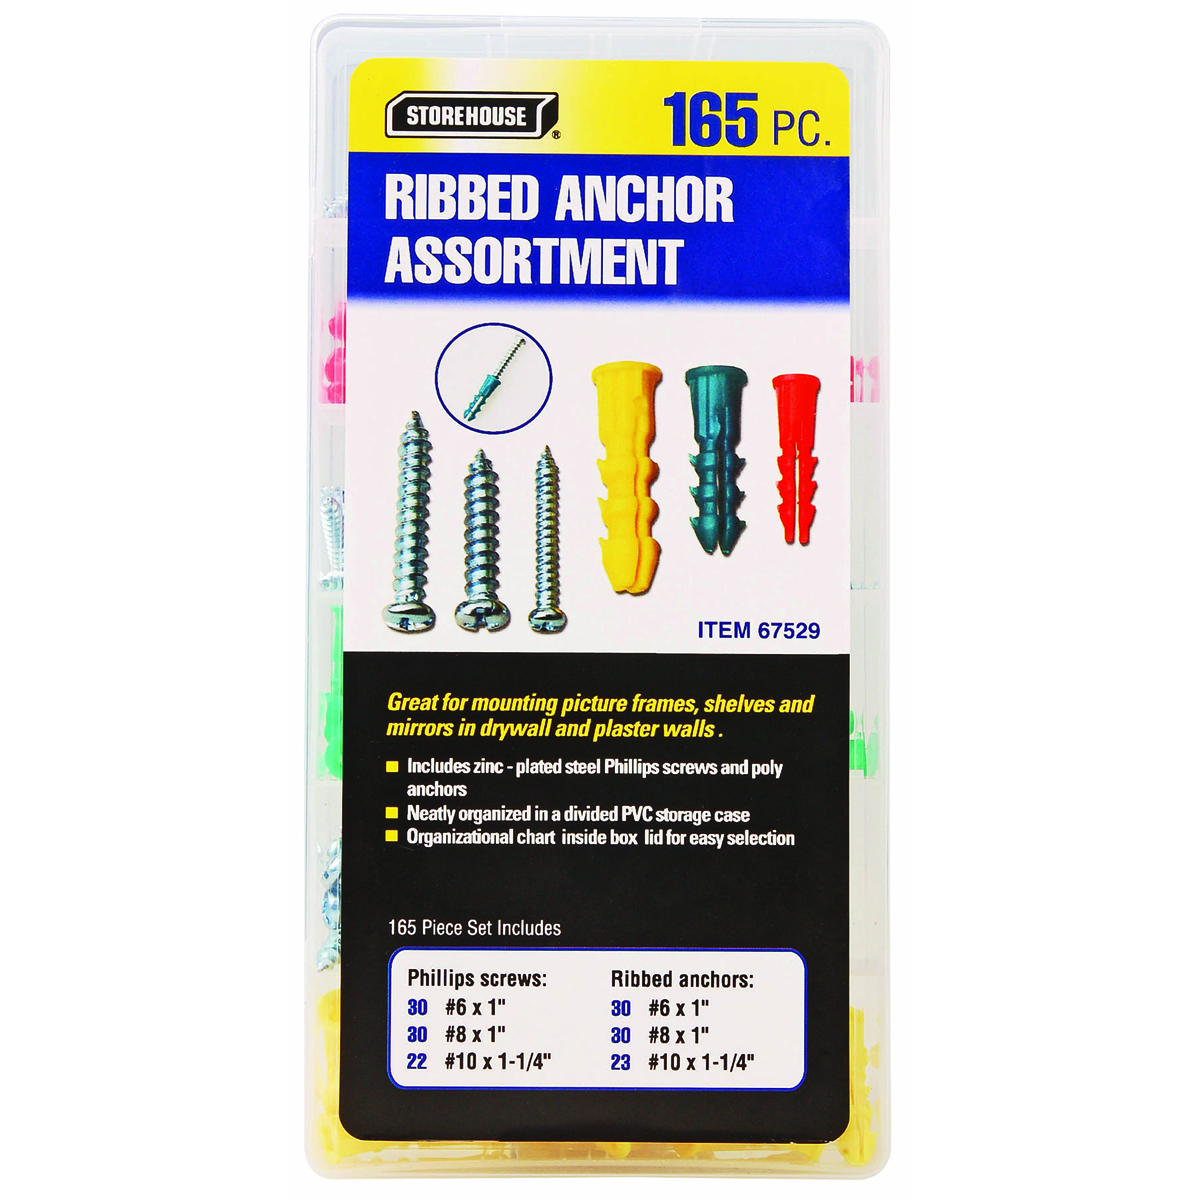 STOREHOUSE Ribbed Anchor Assortment 165 Pc. - Item 67529